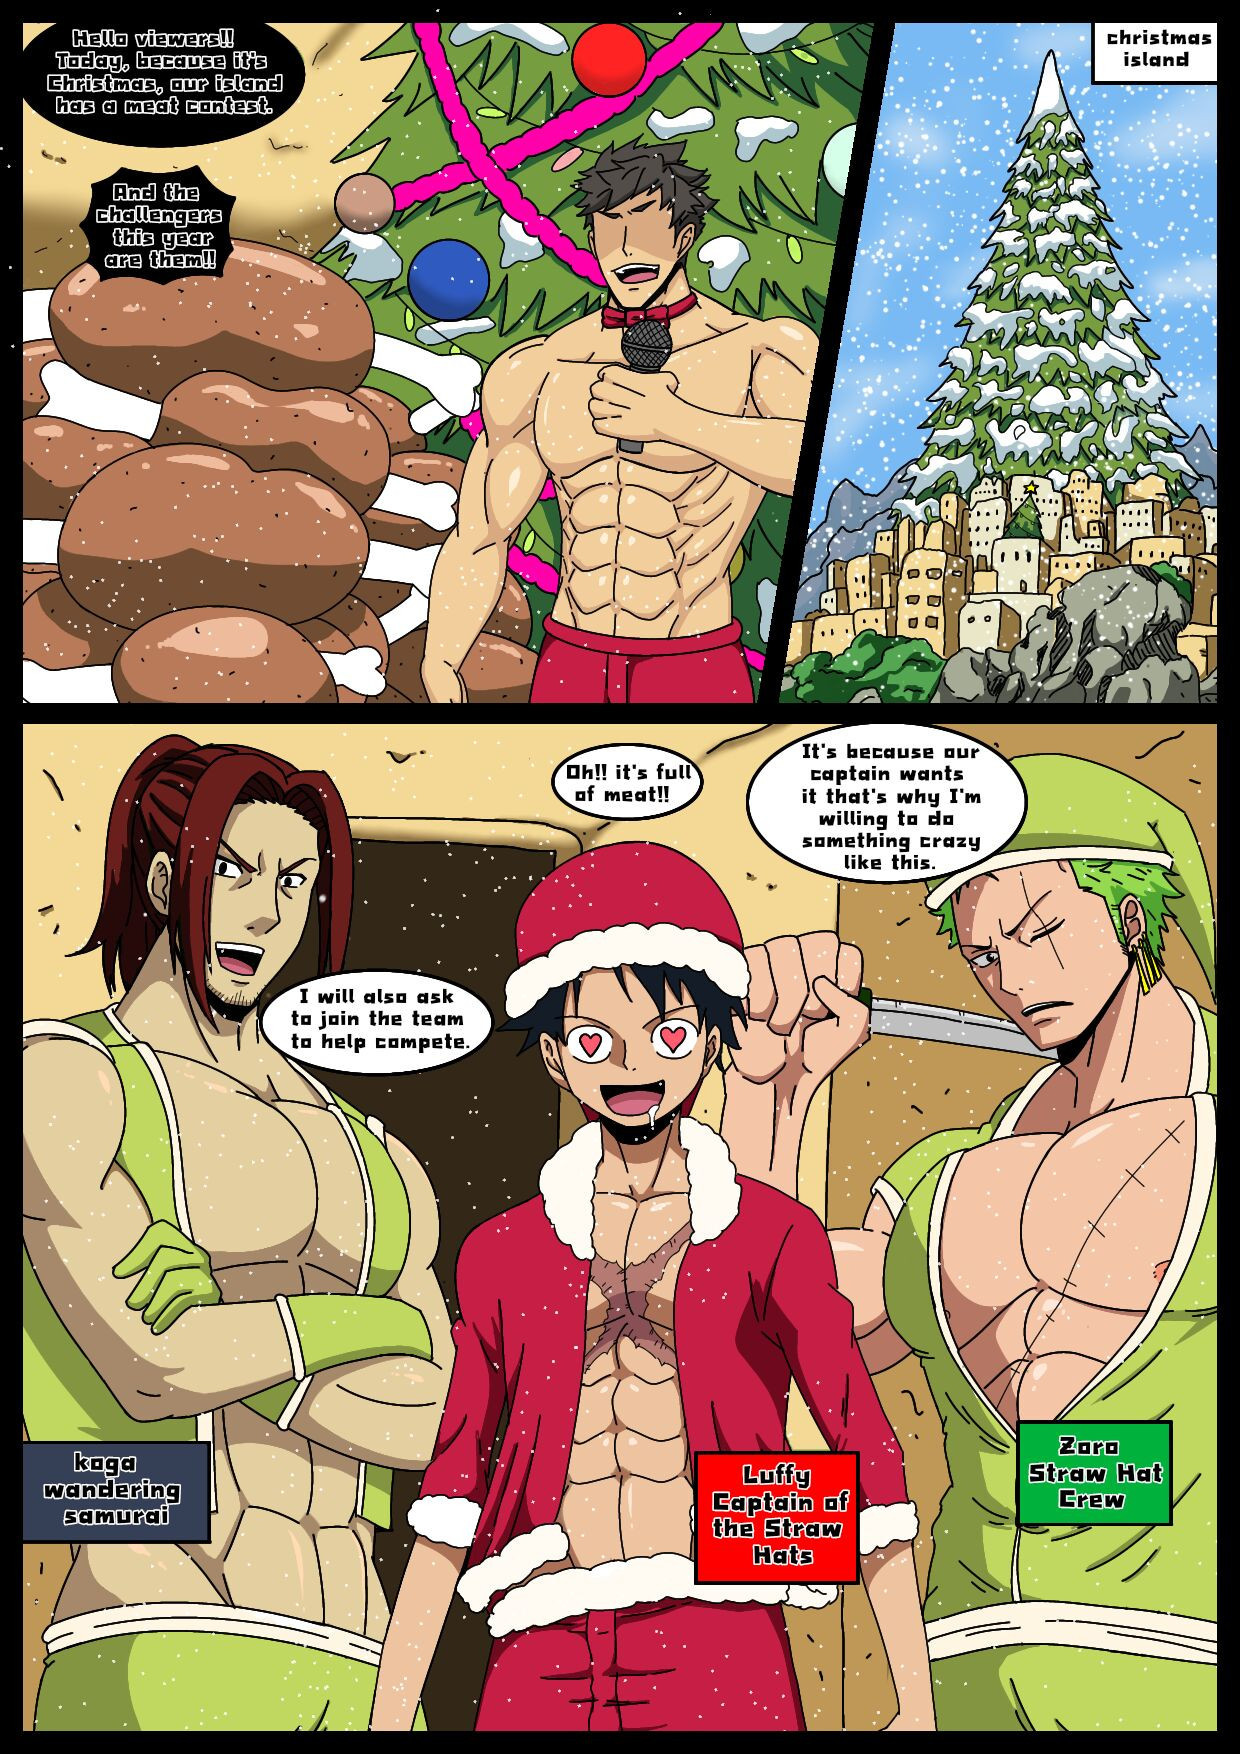 Battle Of Christmas One Piece 00